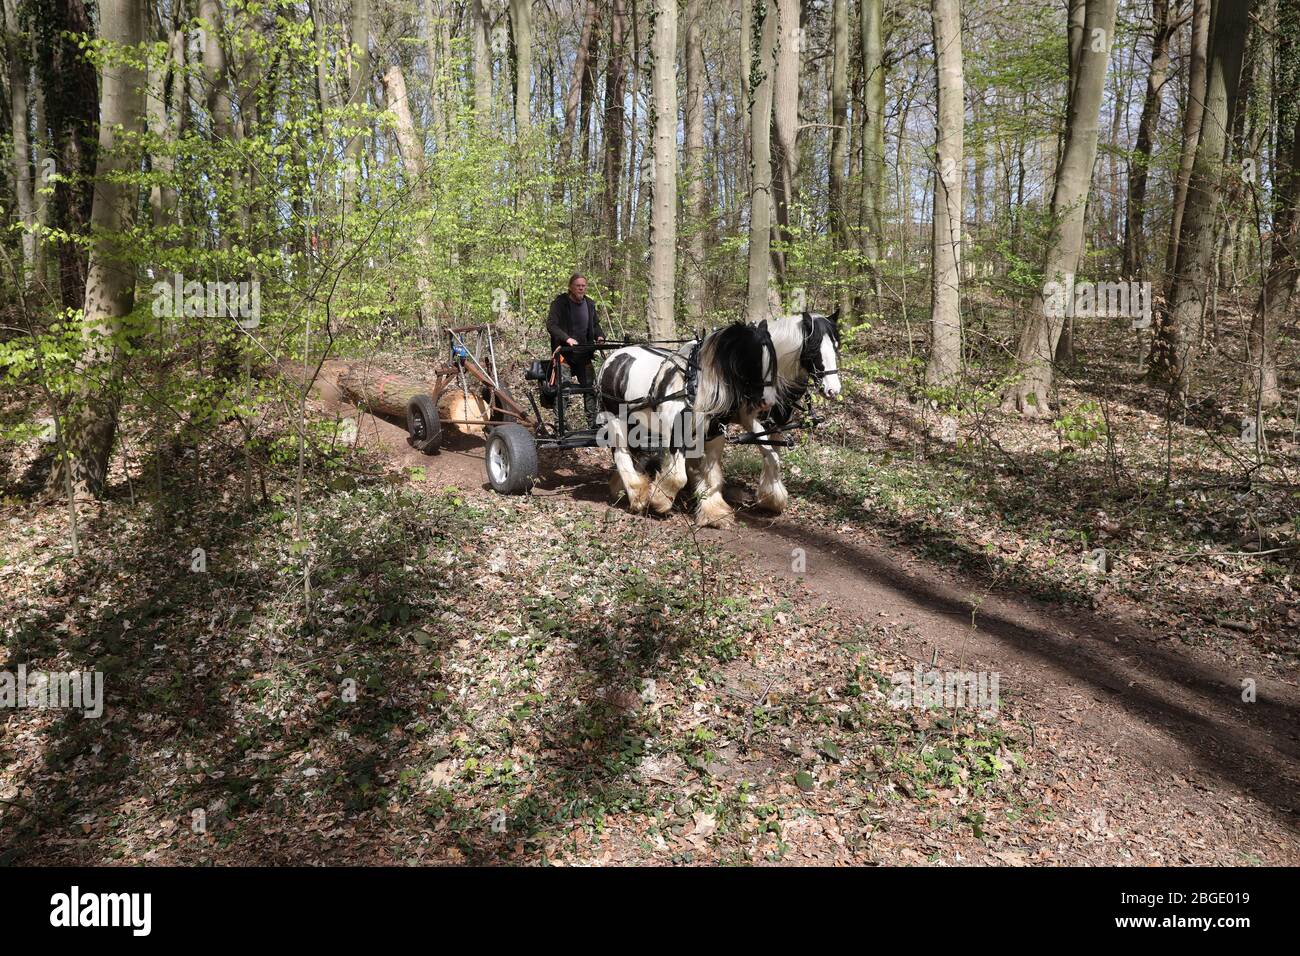 Rostock, Germany. 17th Apr, 2020. In the Swiss forest Marko Jakubzyk works with the pack horses Finola (l-r) and Loreley. The 20 and 10 year old Irish Tinker Horses pull the trunks of trees from the forest, which were felled in the course of the road safety obligation of the municipal forestry office. The use of horses is much less harmful to the forest than the use of heavy machinery. Credit: Bernd Wüstneck/dpa-Zentralbild/dpa/Alamy Live News Stock Photo